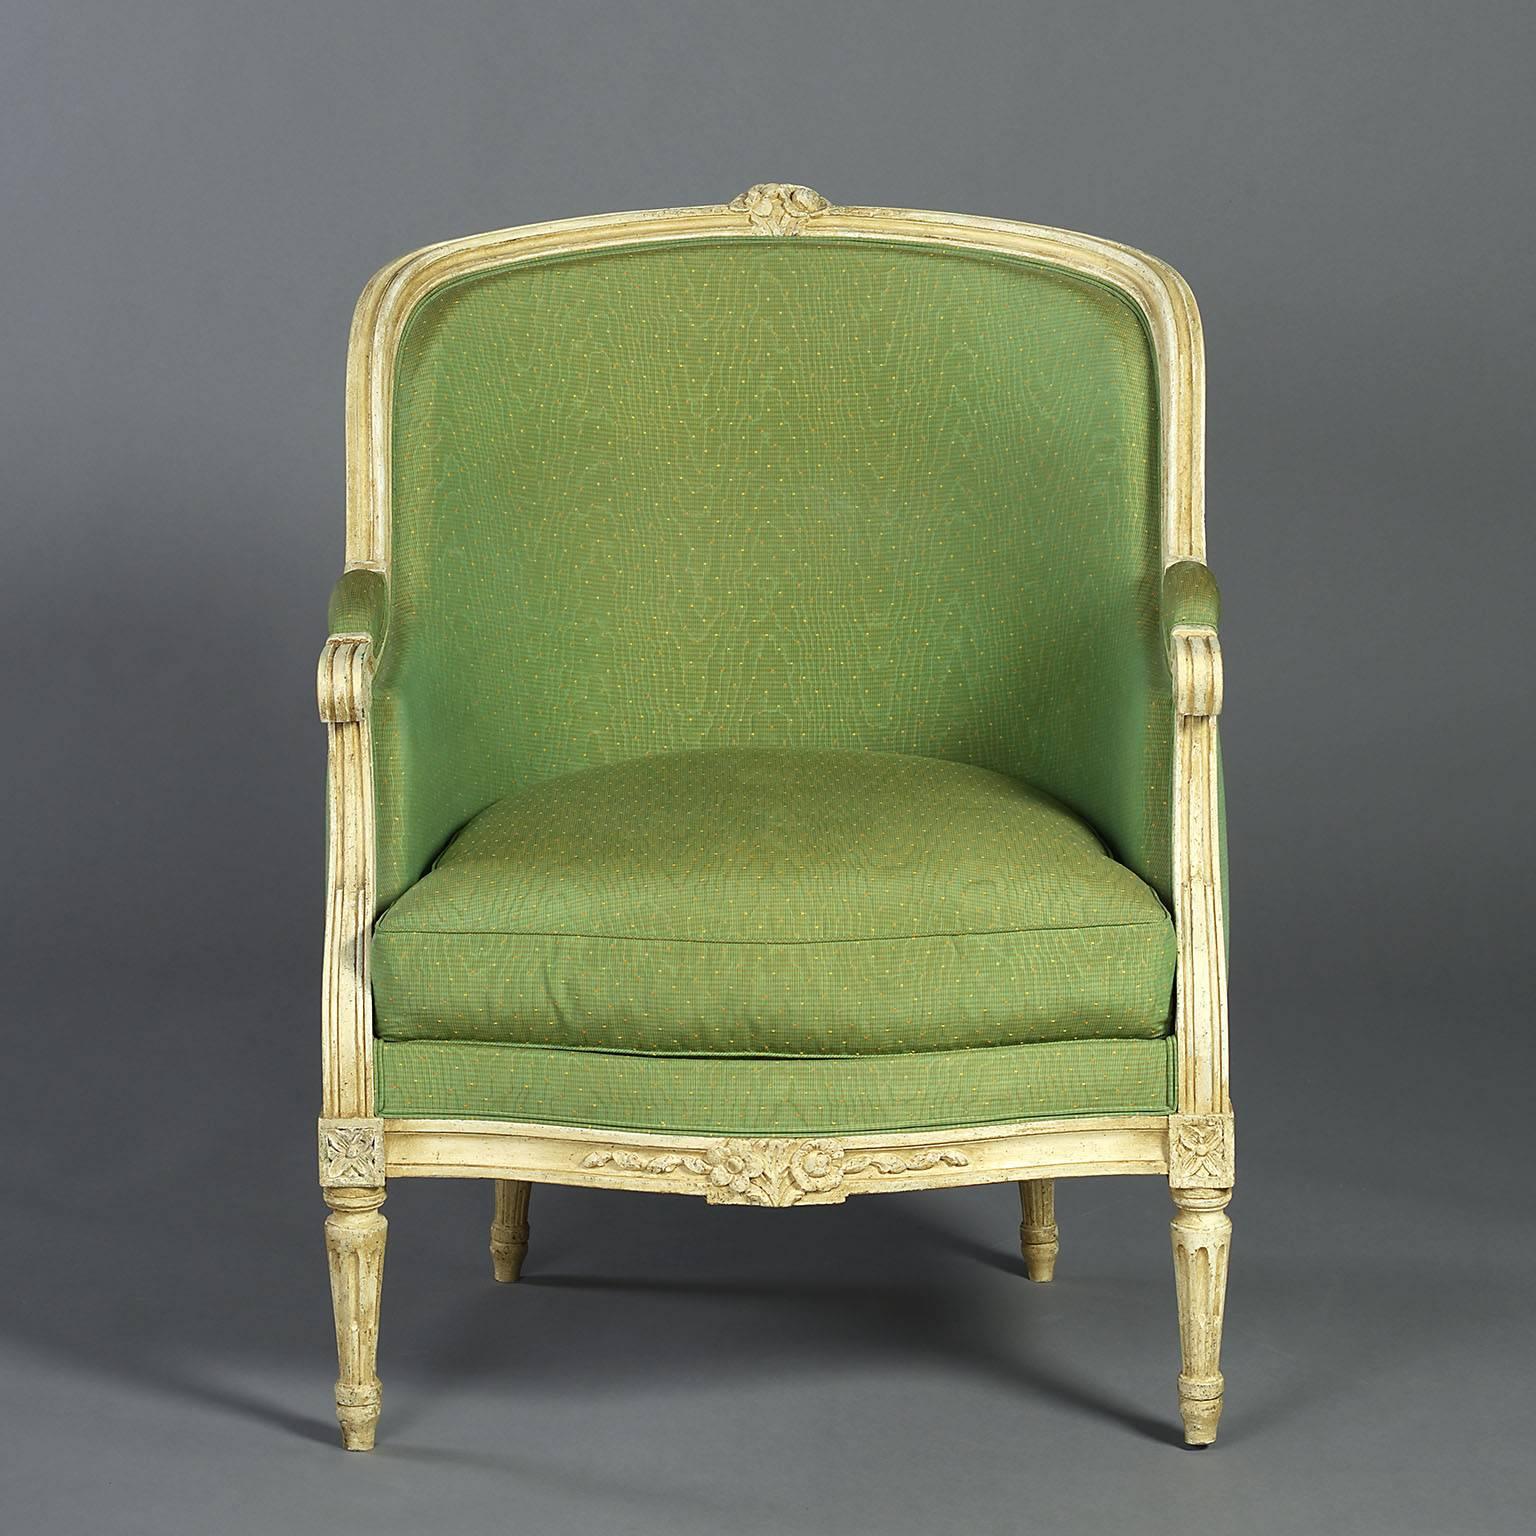 A pair of late 19th century painted bergère of good scale with curved backs, supported on tapering fluted legs with carved paterae.